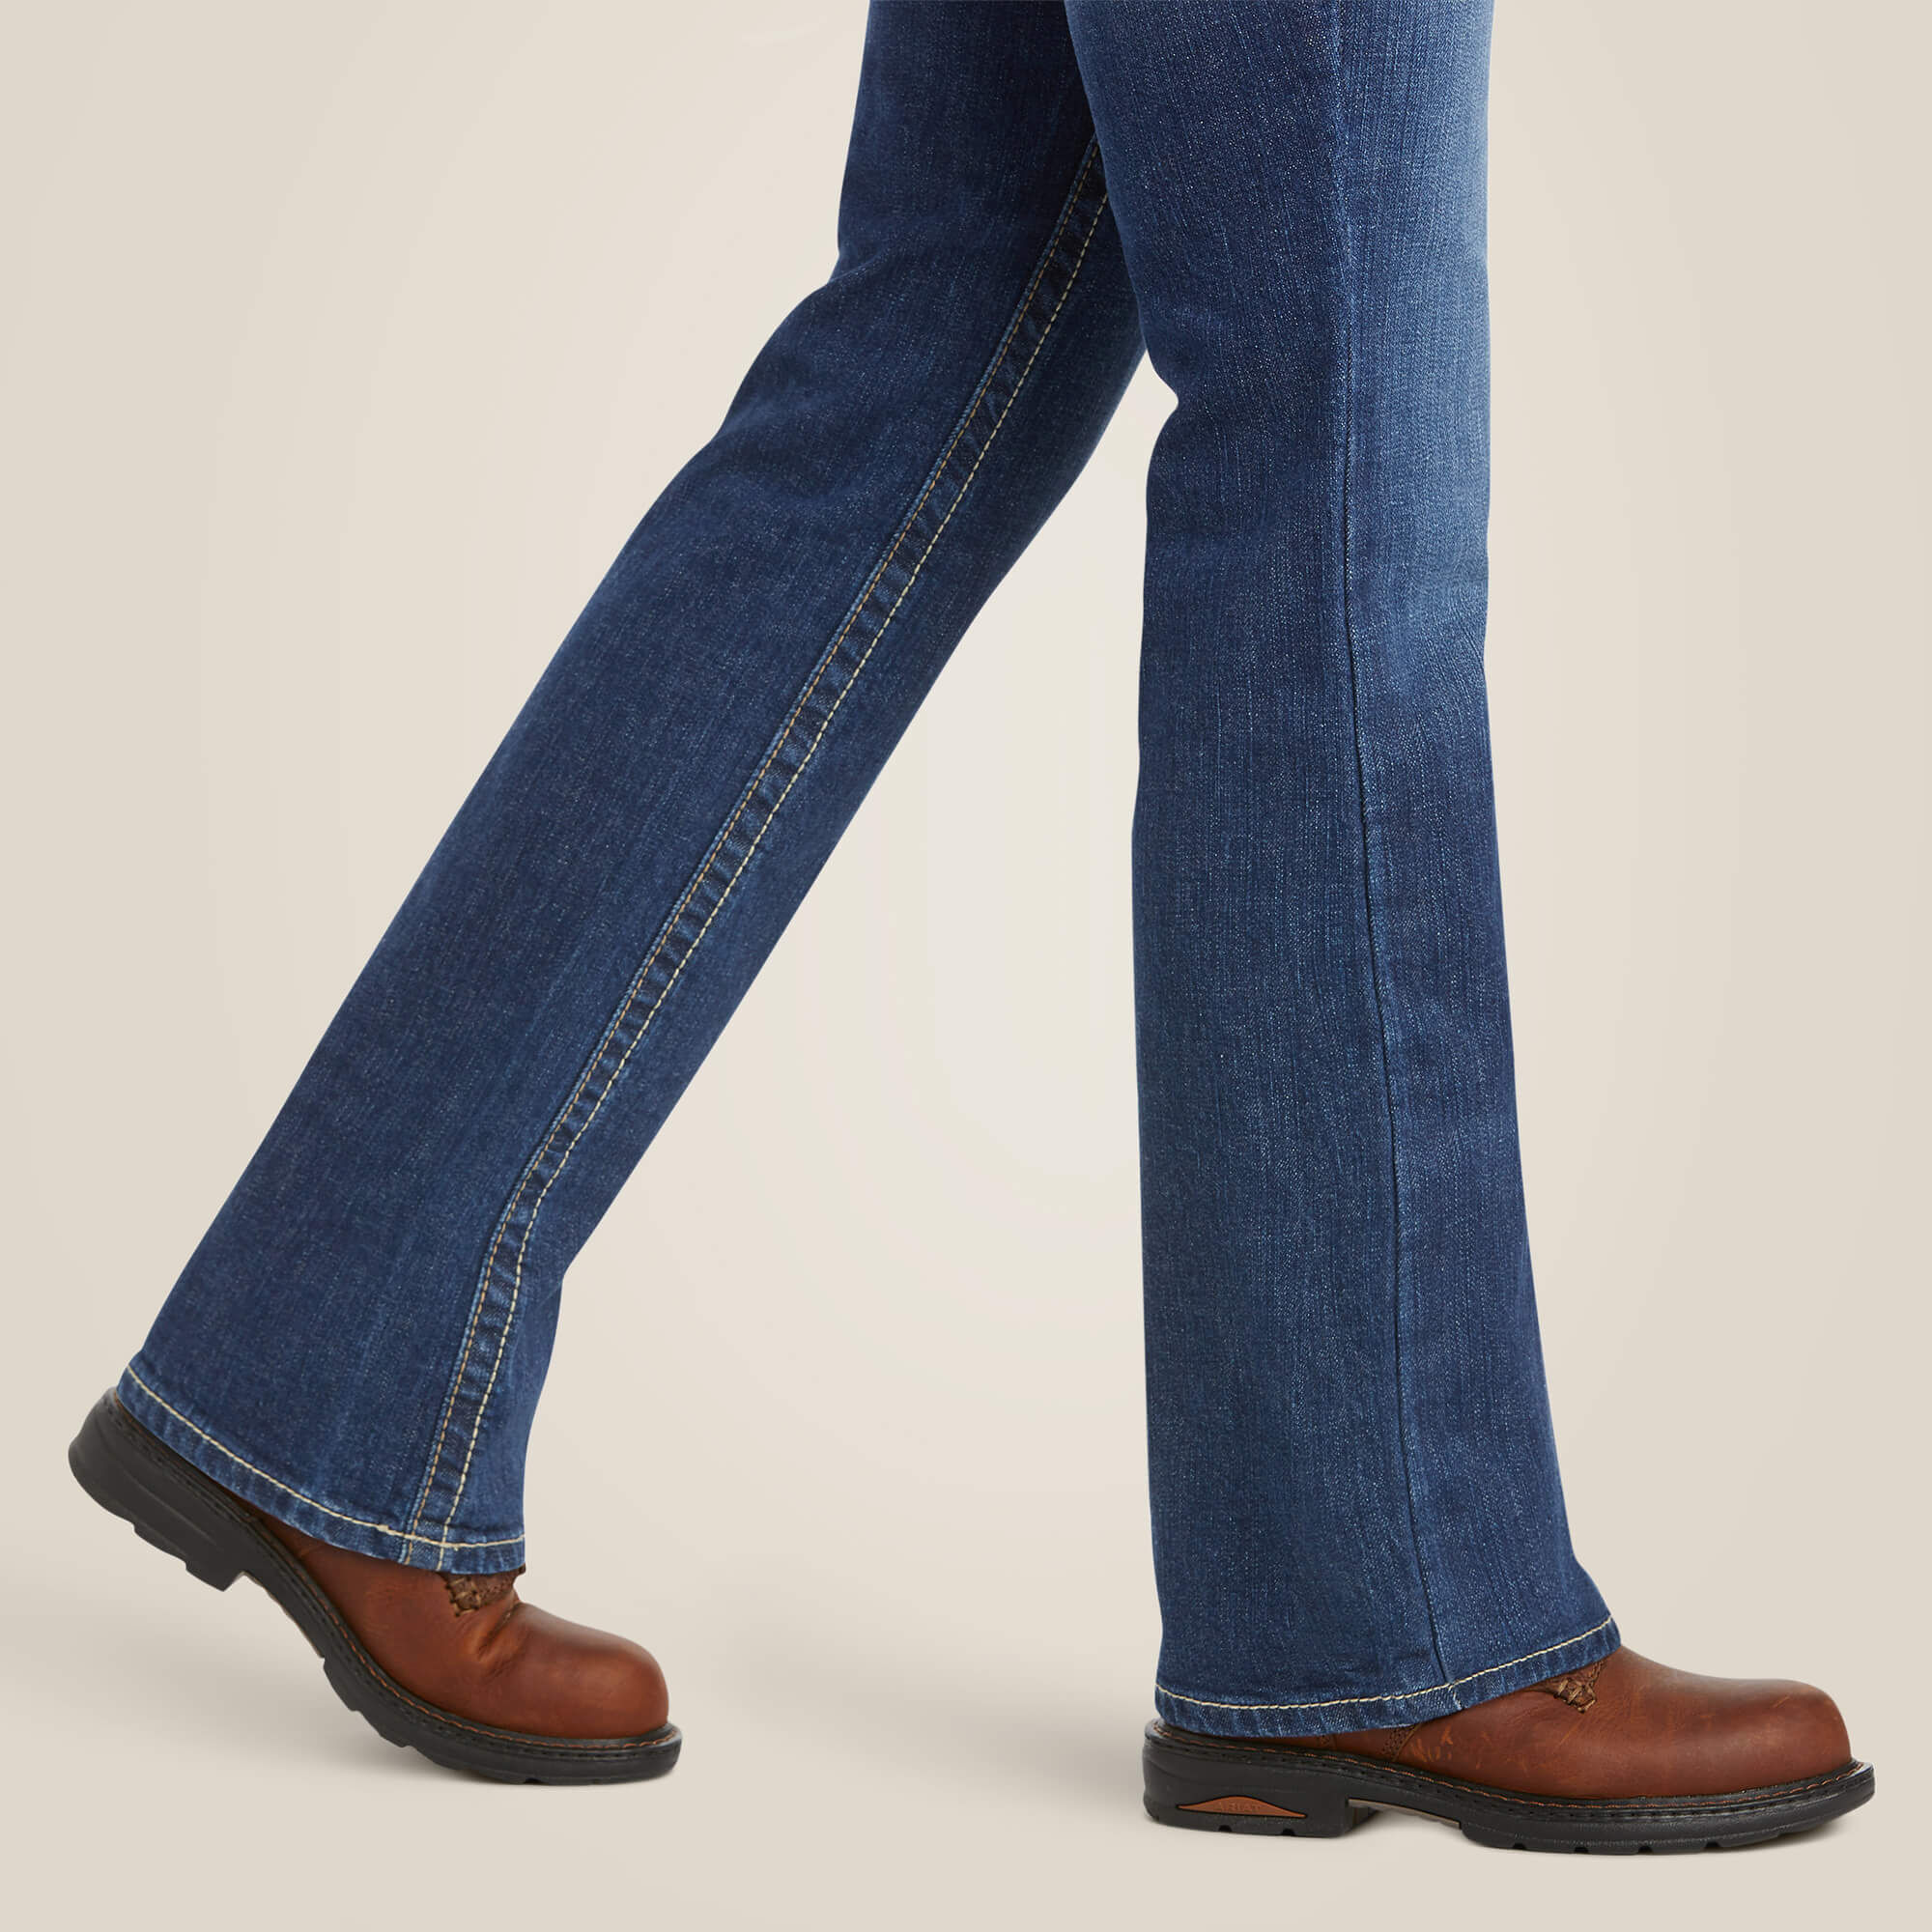 6 Best Looks for Bootcut Jeans  Best Bootcut Jeans for Women